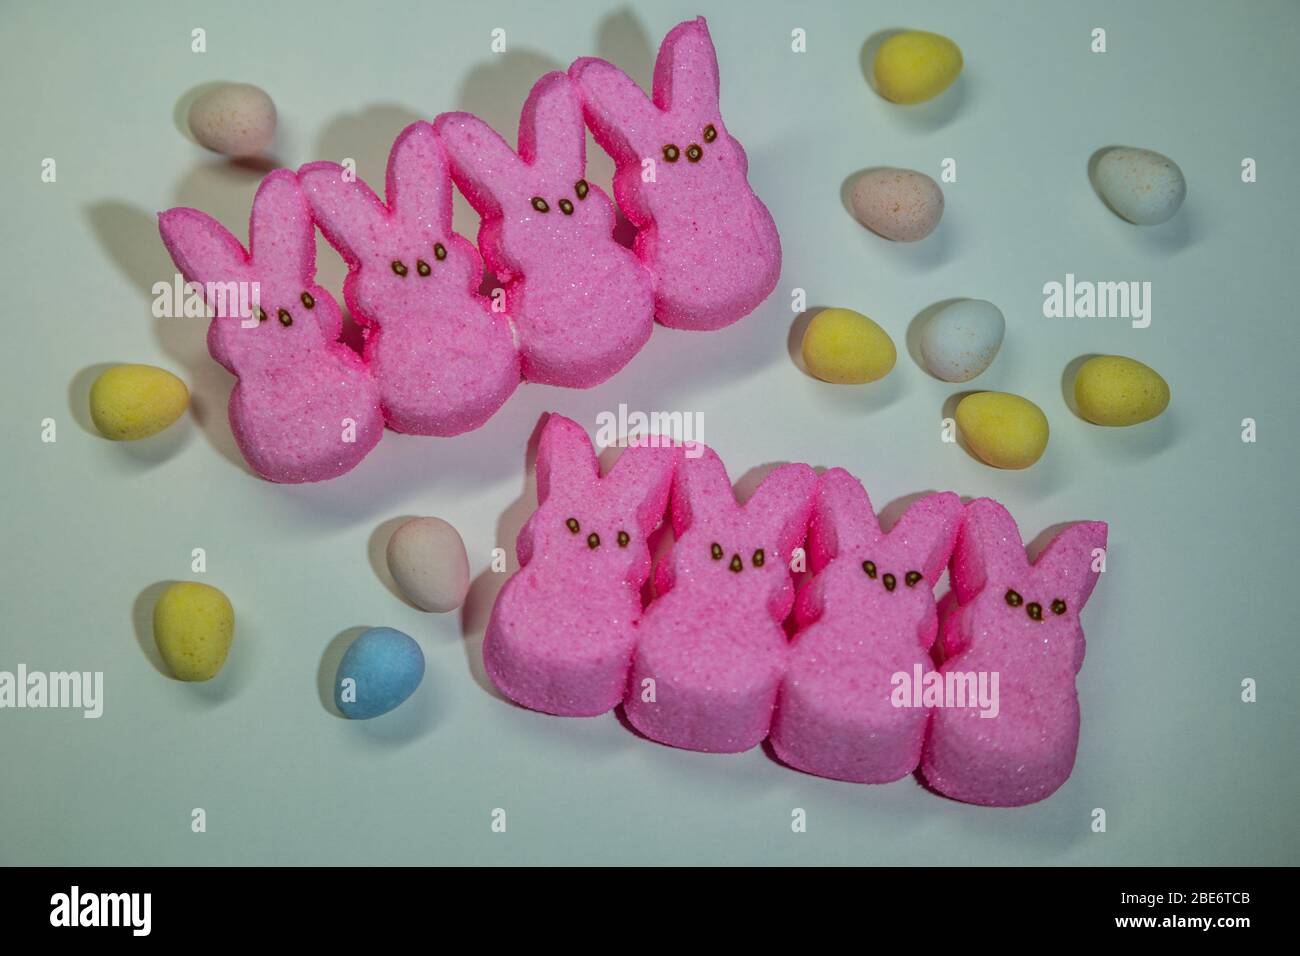 Arrangement of bright pink marshmallow bunny peeps with assortment of colorful candy eggs surrounding on a white background Stock Photo